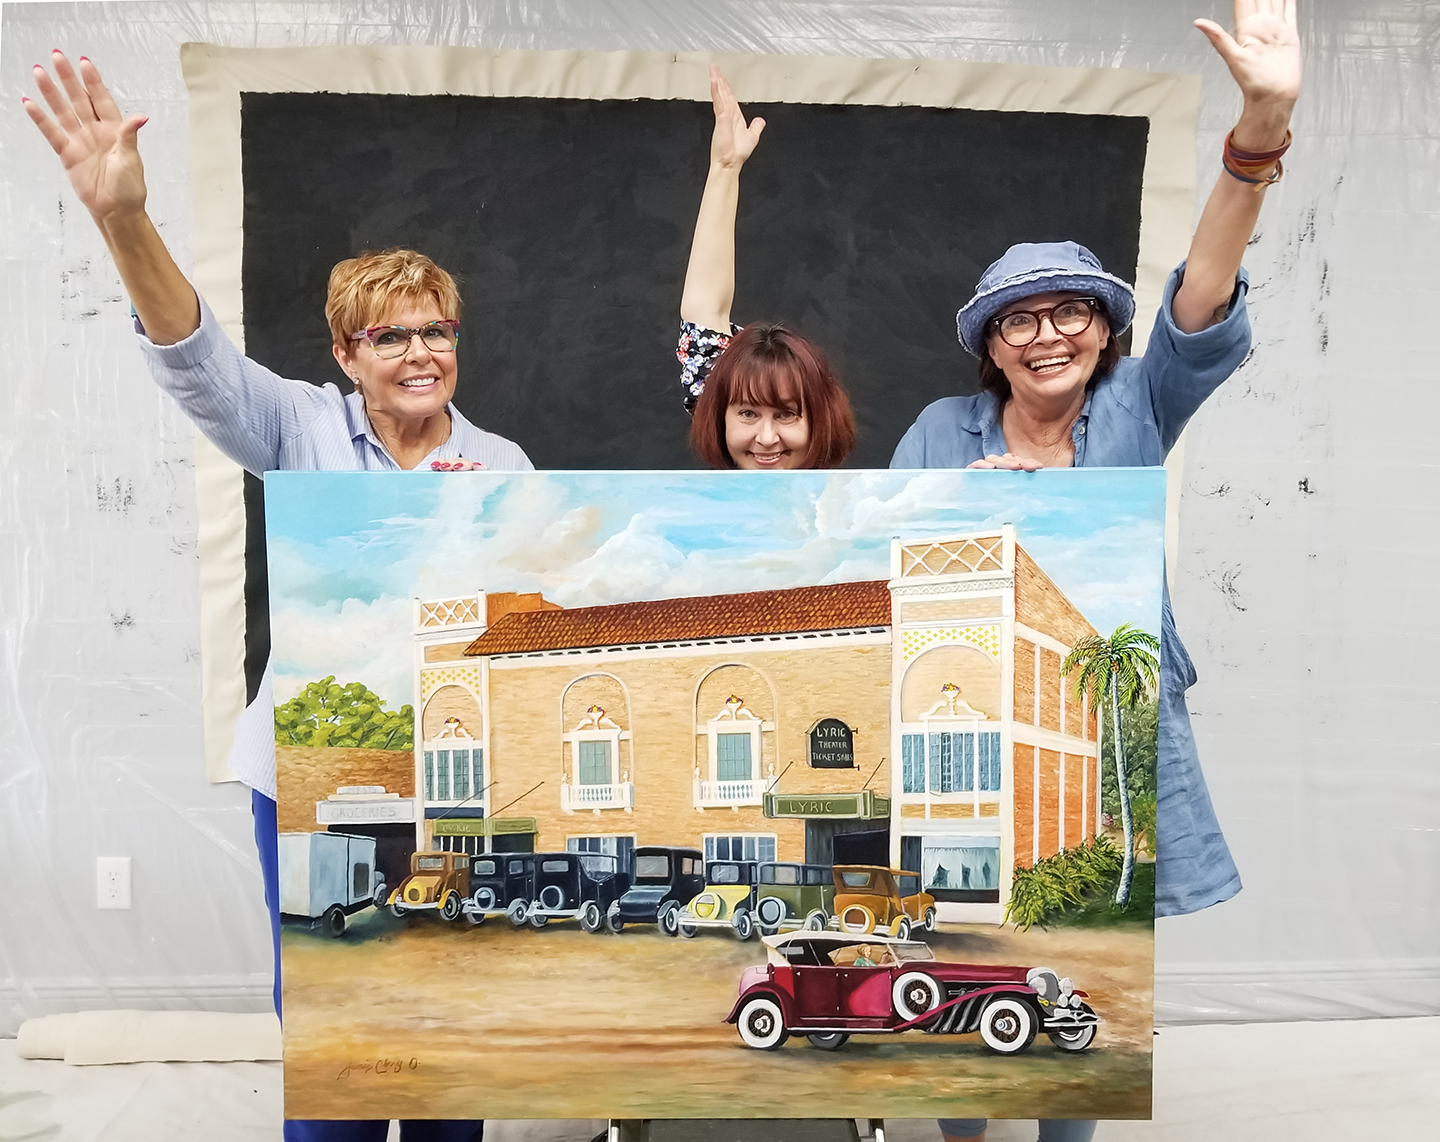 D&J Art Studio: Janis Clary "O" and Danuta Rothschild. Art & Relics Sale to benefit the steeple restoration on the historic building